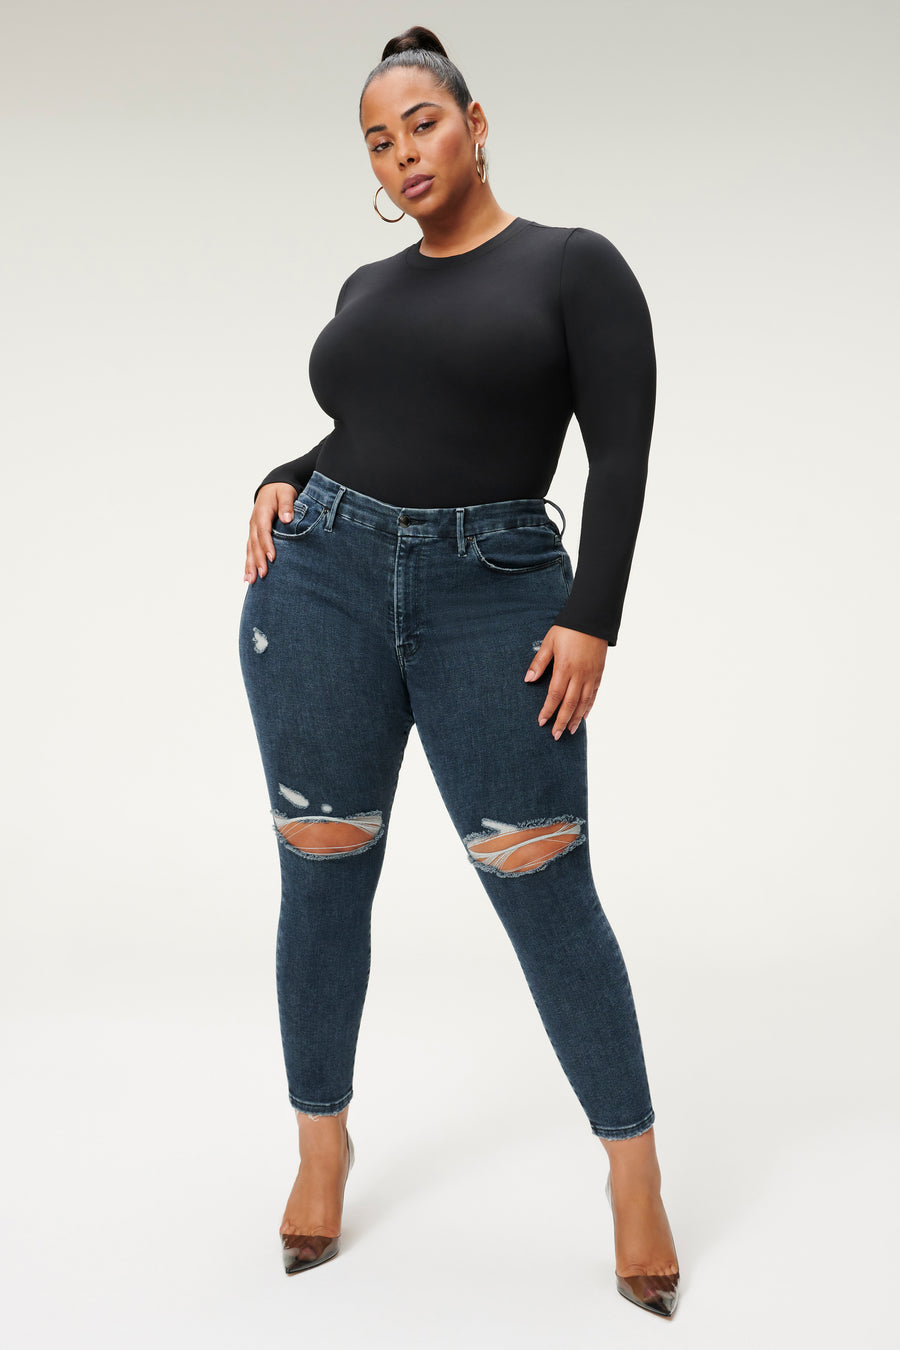 ALWAYS FITS GOOD WAIST CROPPED SKINNY JEANS | BLUE857 - GOOD AMERICAN